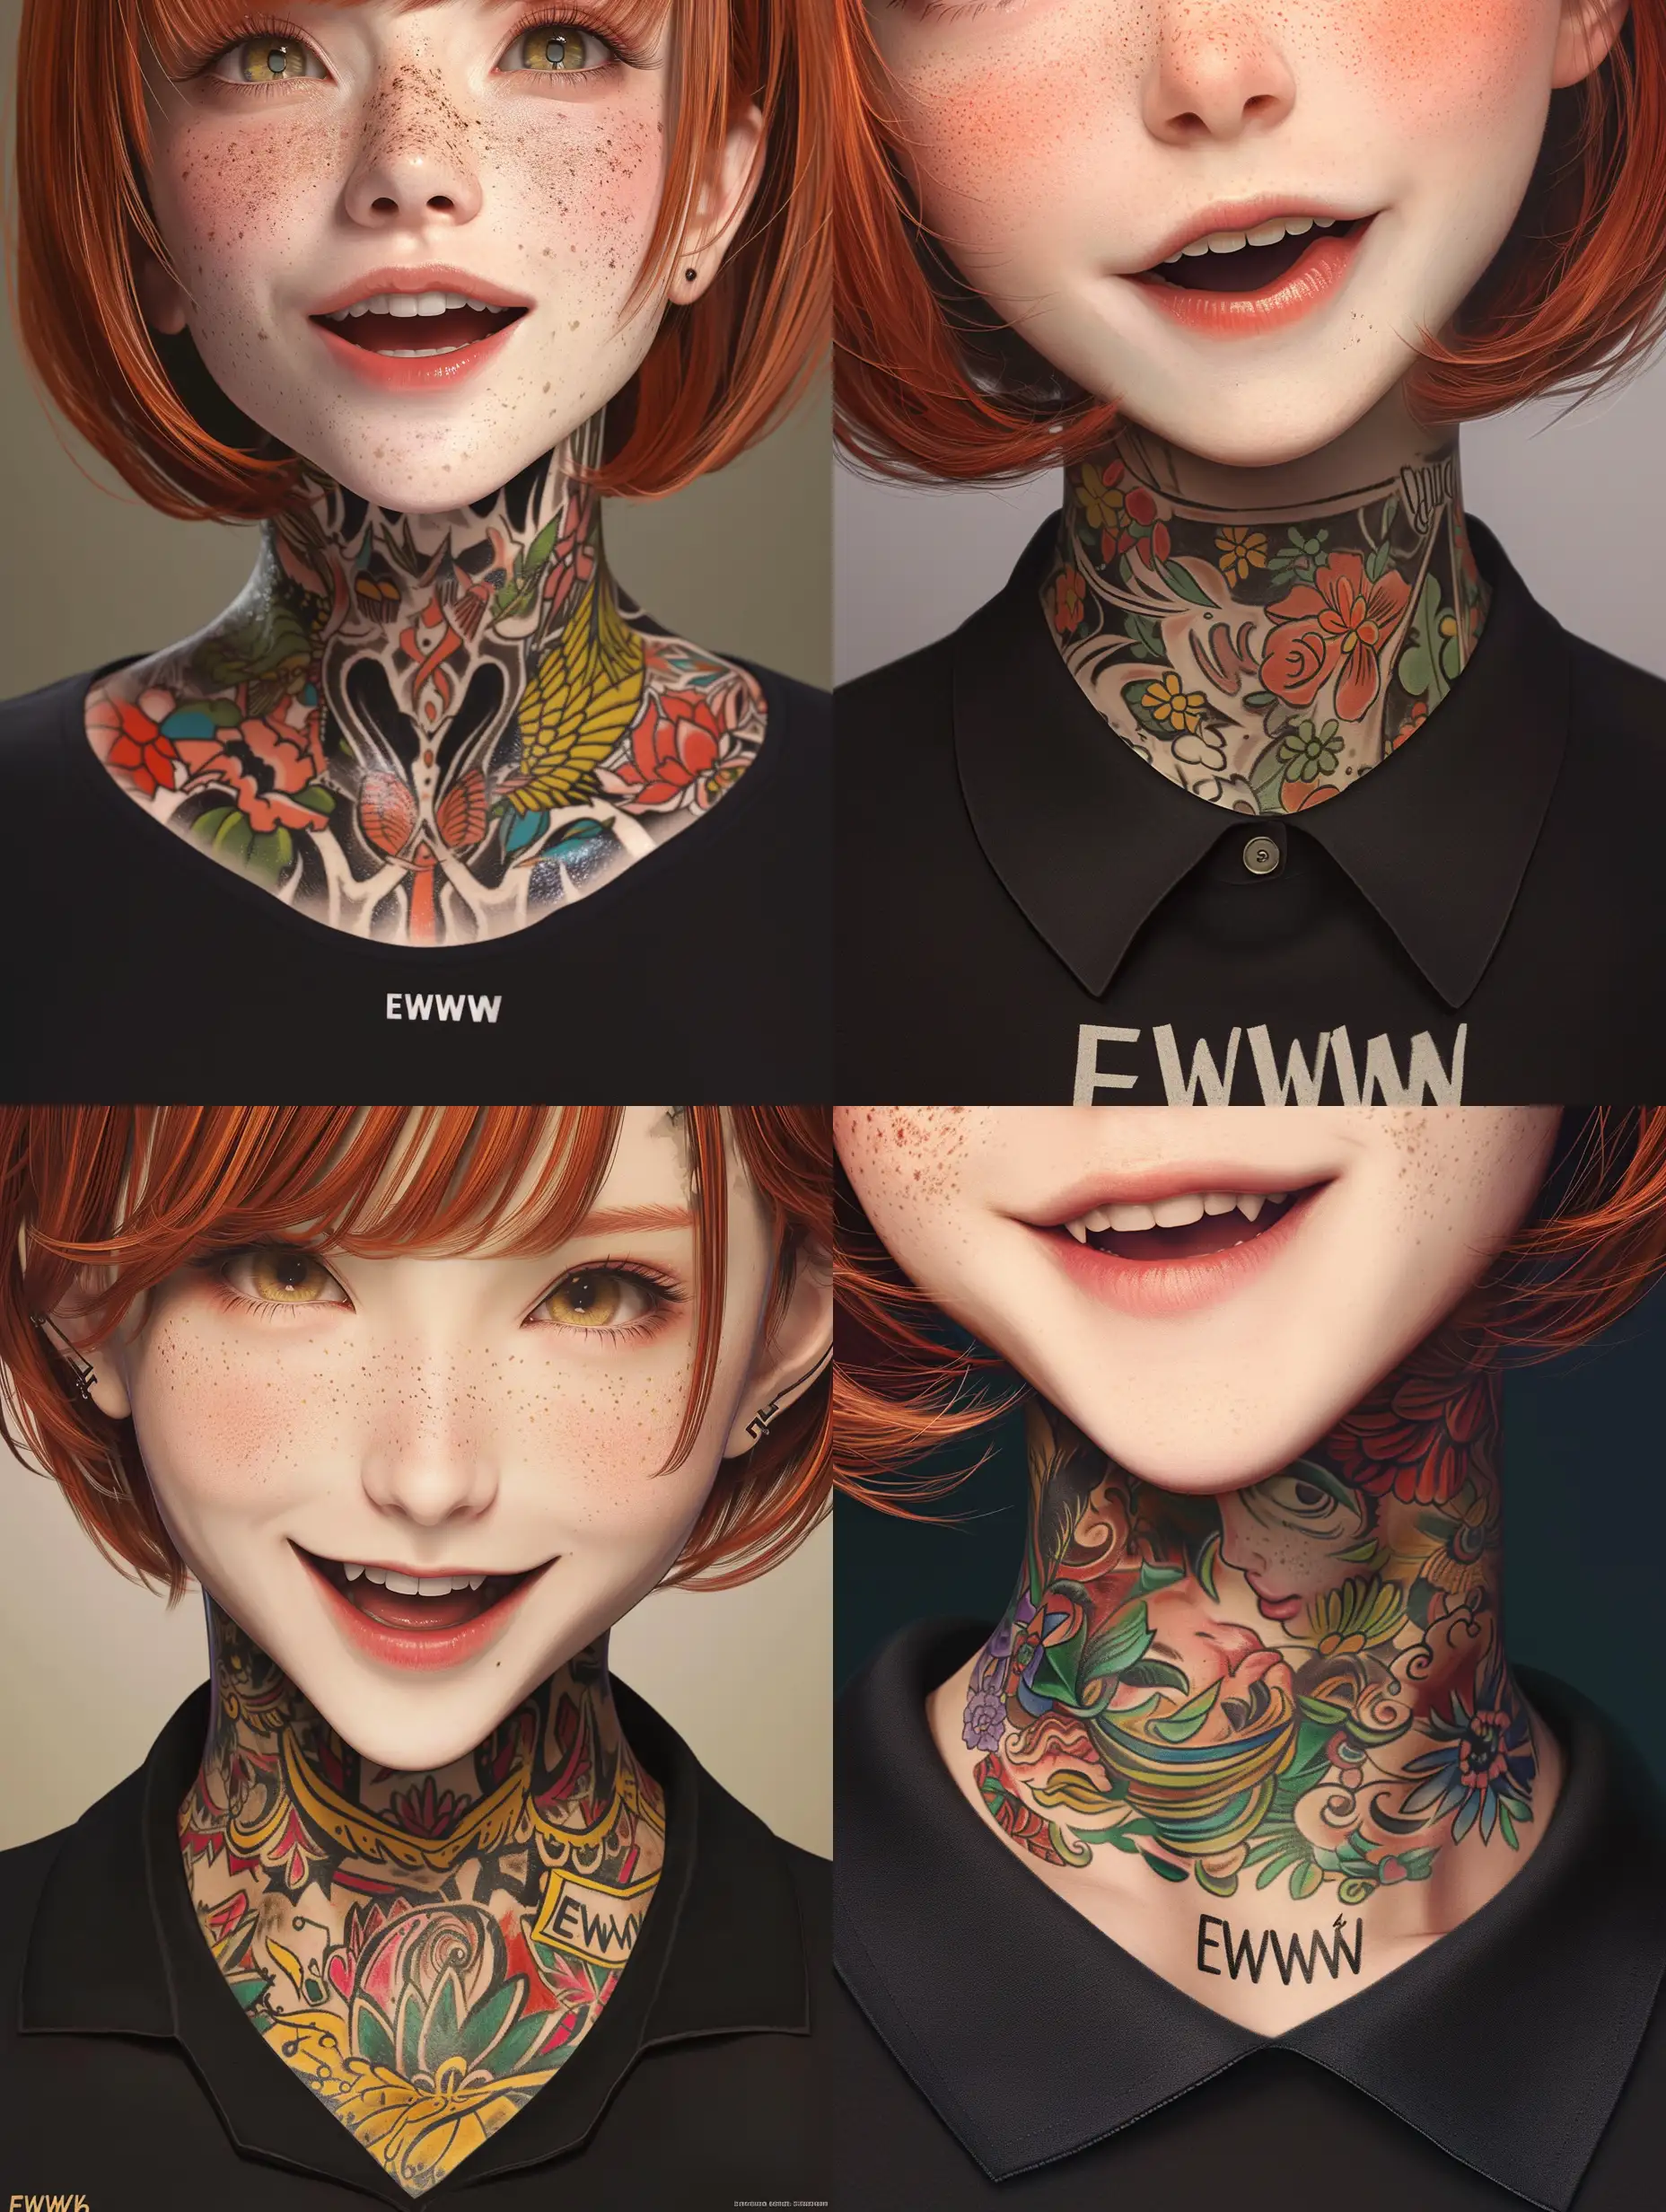 face close up of a supercute anime woman,short red hair, freckles, open smile, head above, look at viewer, long neck, collar with the inscription "EWW", black shirt, animated illustrations, hyper realistic 4khyper realistic 4k,, exotic realism, vibrant manga, tattoo-inspired, full body intensity, japanese-inspired :: anime::-0.1 --niji 6 --s 250 --style raw